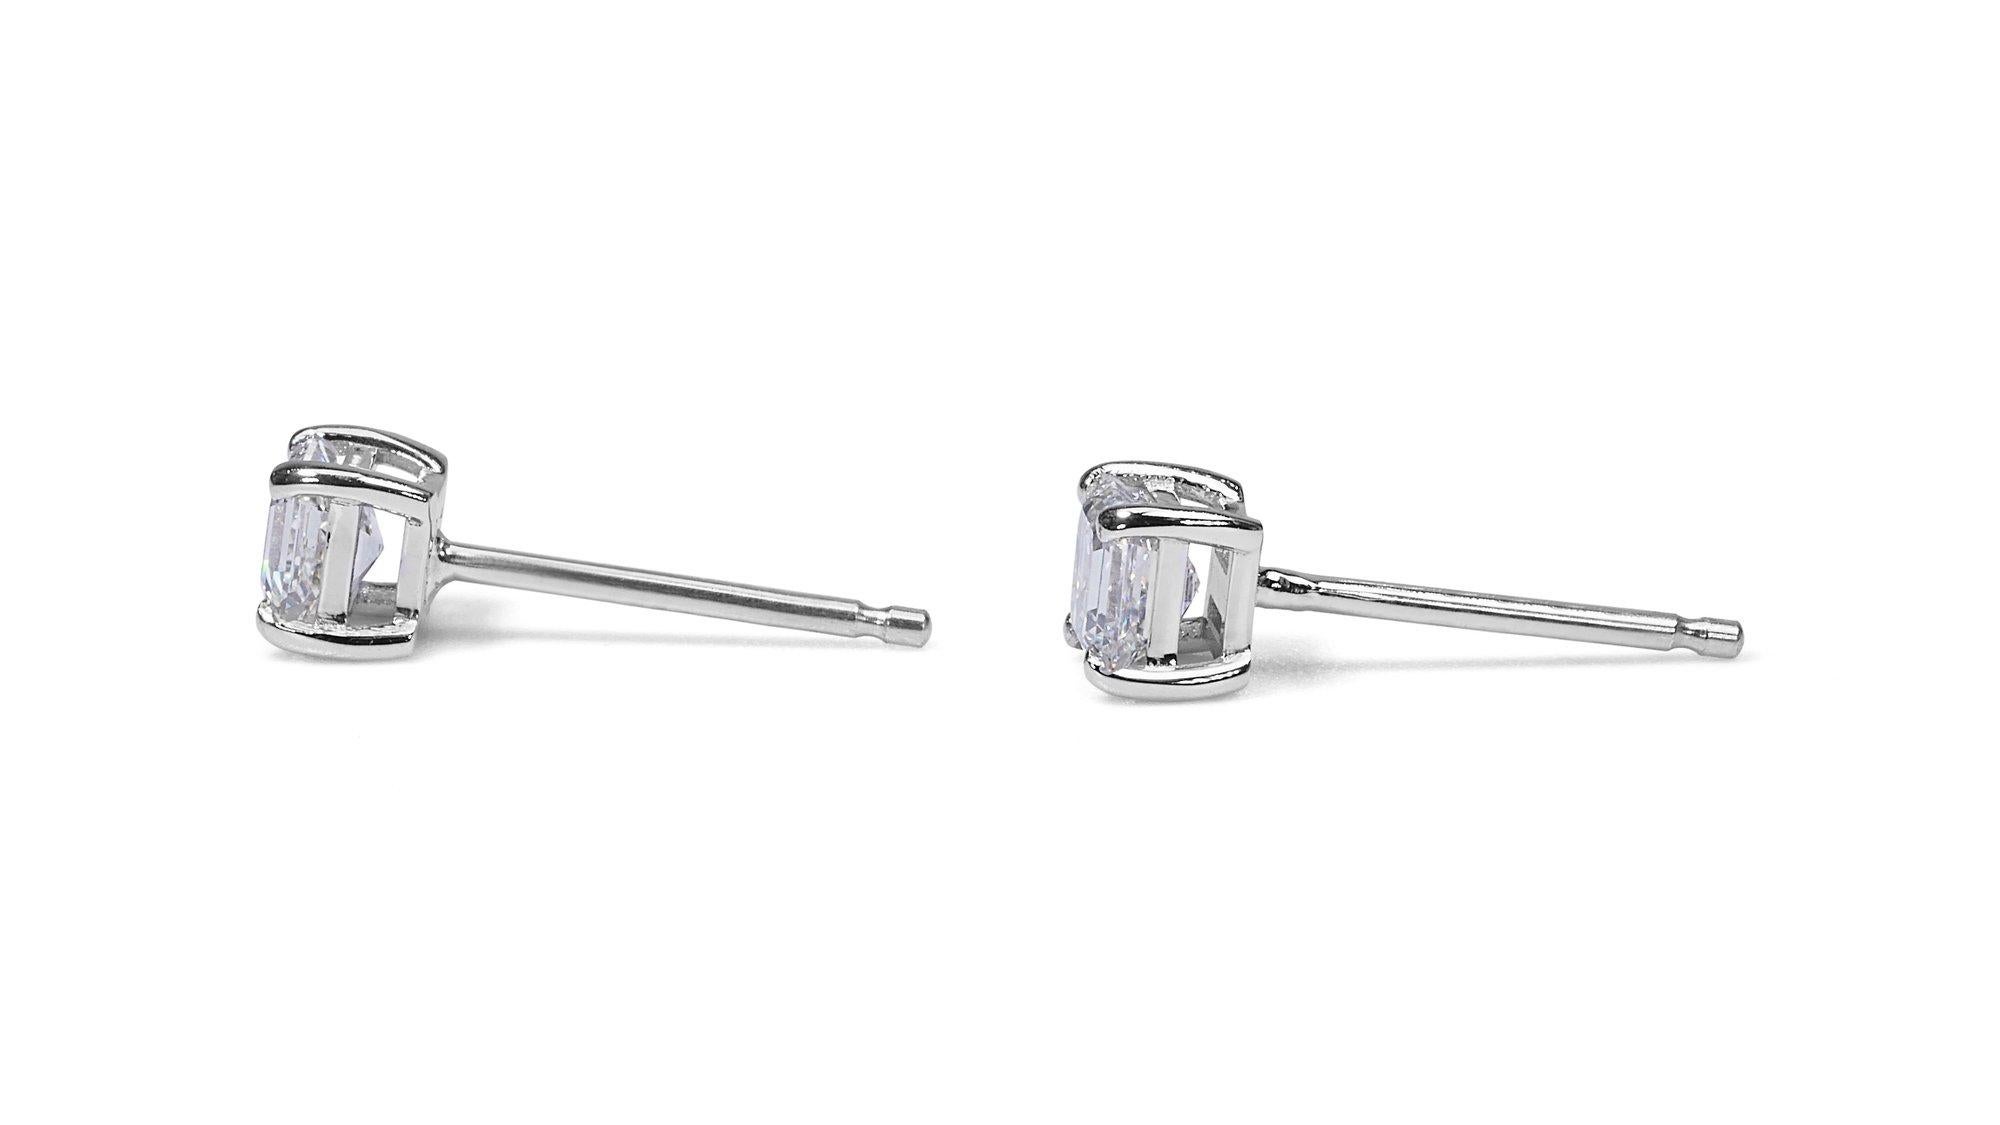 Sparkling 18k White gold Stud Earrings with 1.02 ct natural diamonds GIA Cert For Sale 3